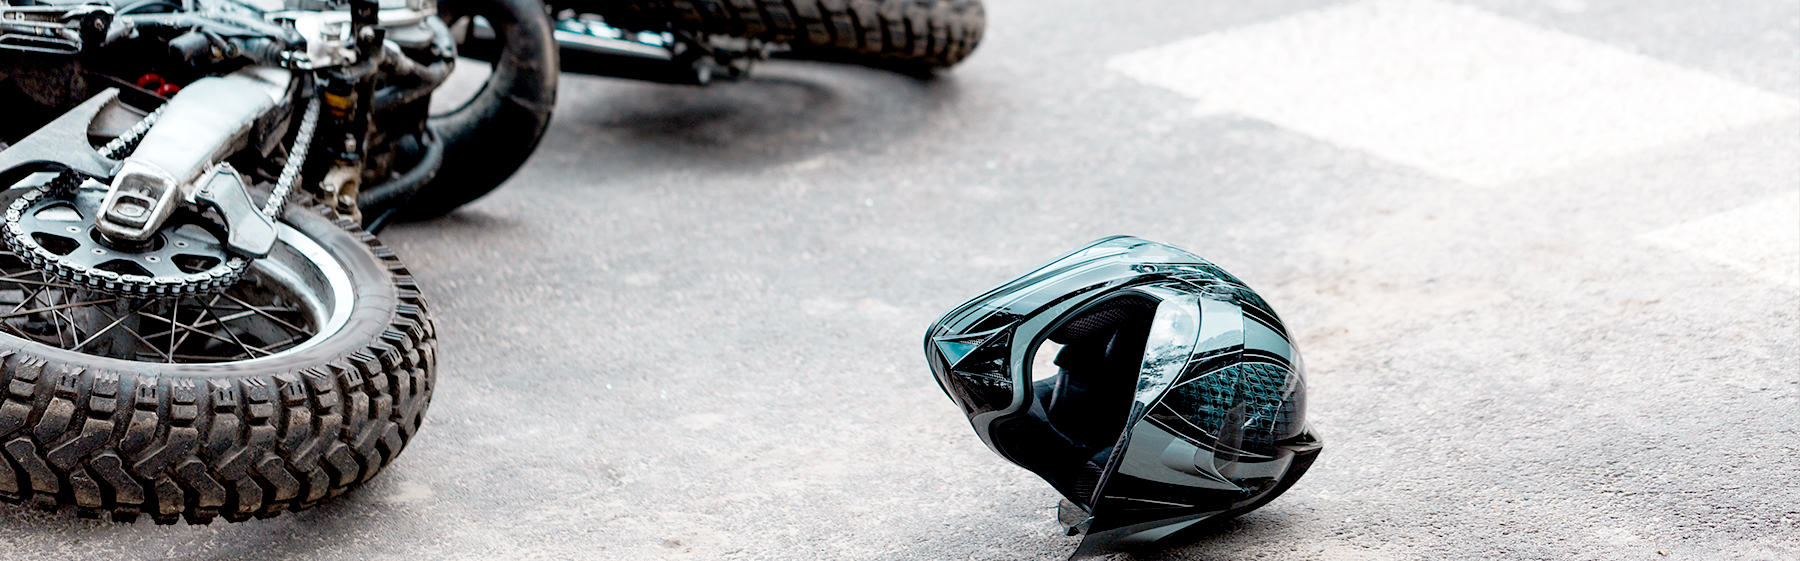 A motorcycle accident can make dealing with insurance companies confusing and overwhelming.